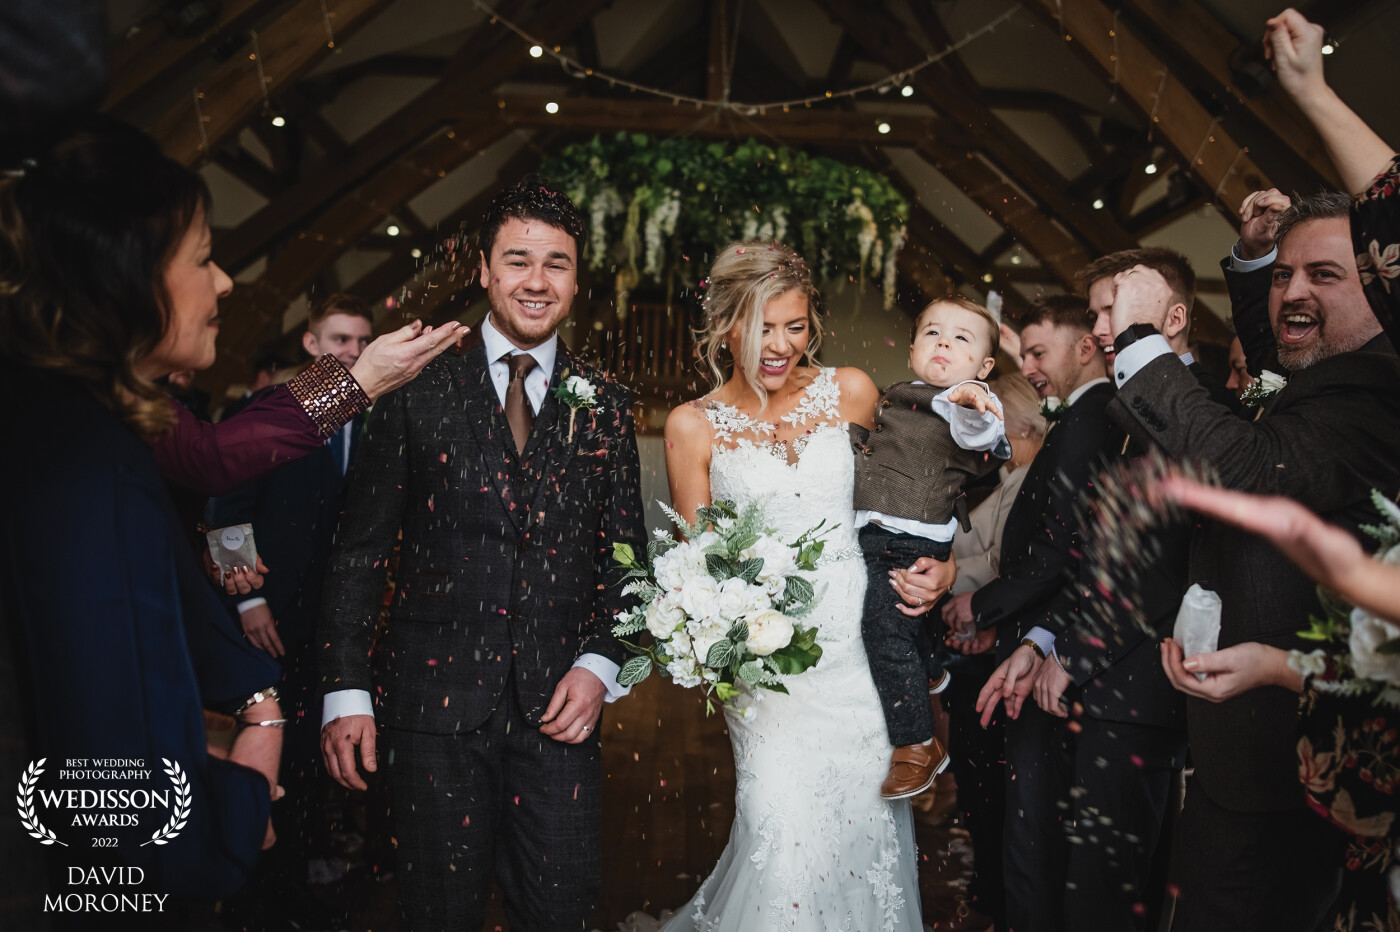 Bethany & Richard decided on a winter wedding at Sandburn hall near York. The weather outside wasn't too favourable so straight after the ceremony the venue had agreed that we could do the confetti shot inside.